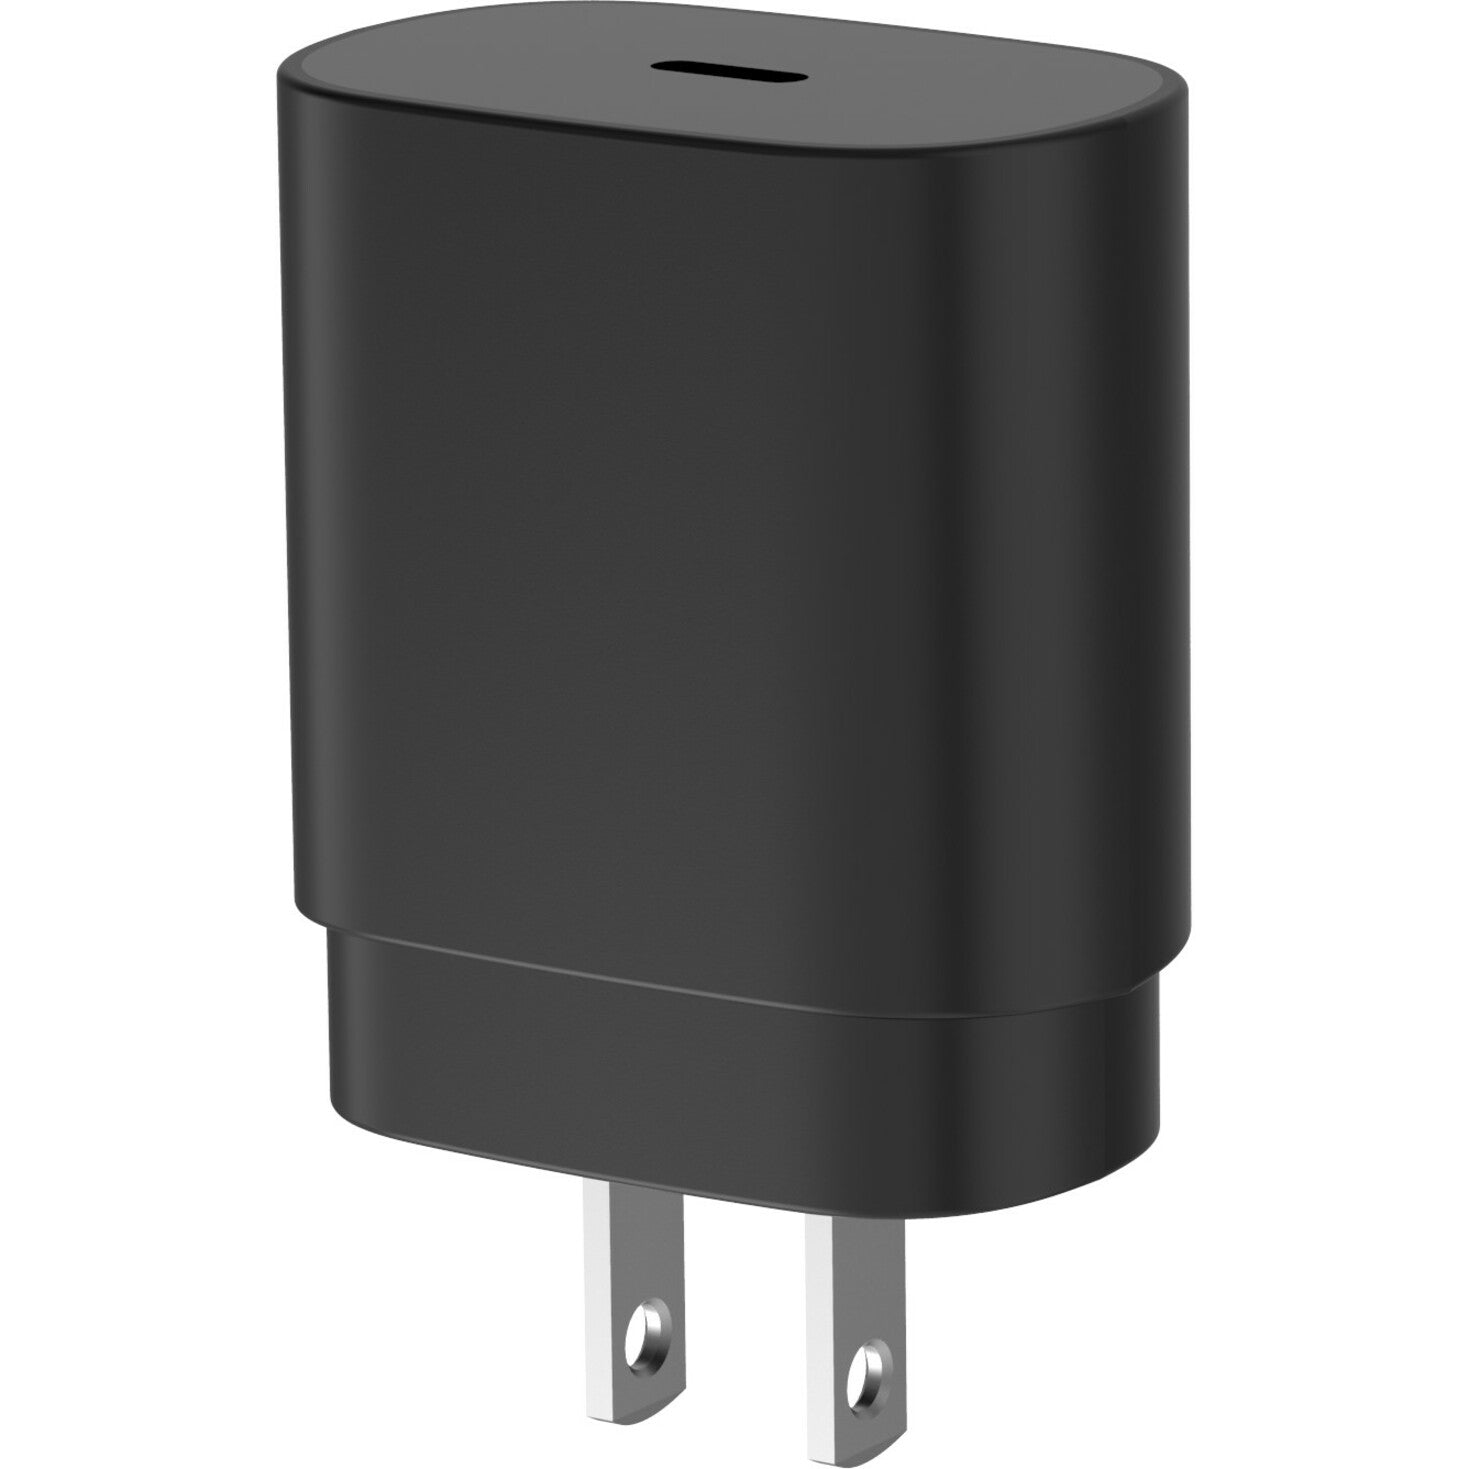 4XEM 4XRLC38325WB 25W USB-C Wall Charger - Black, Fast Charging for Notebooks, Tablets, and Smartphones